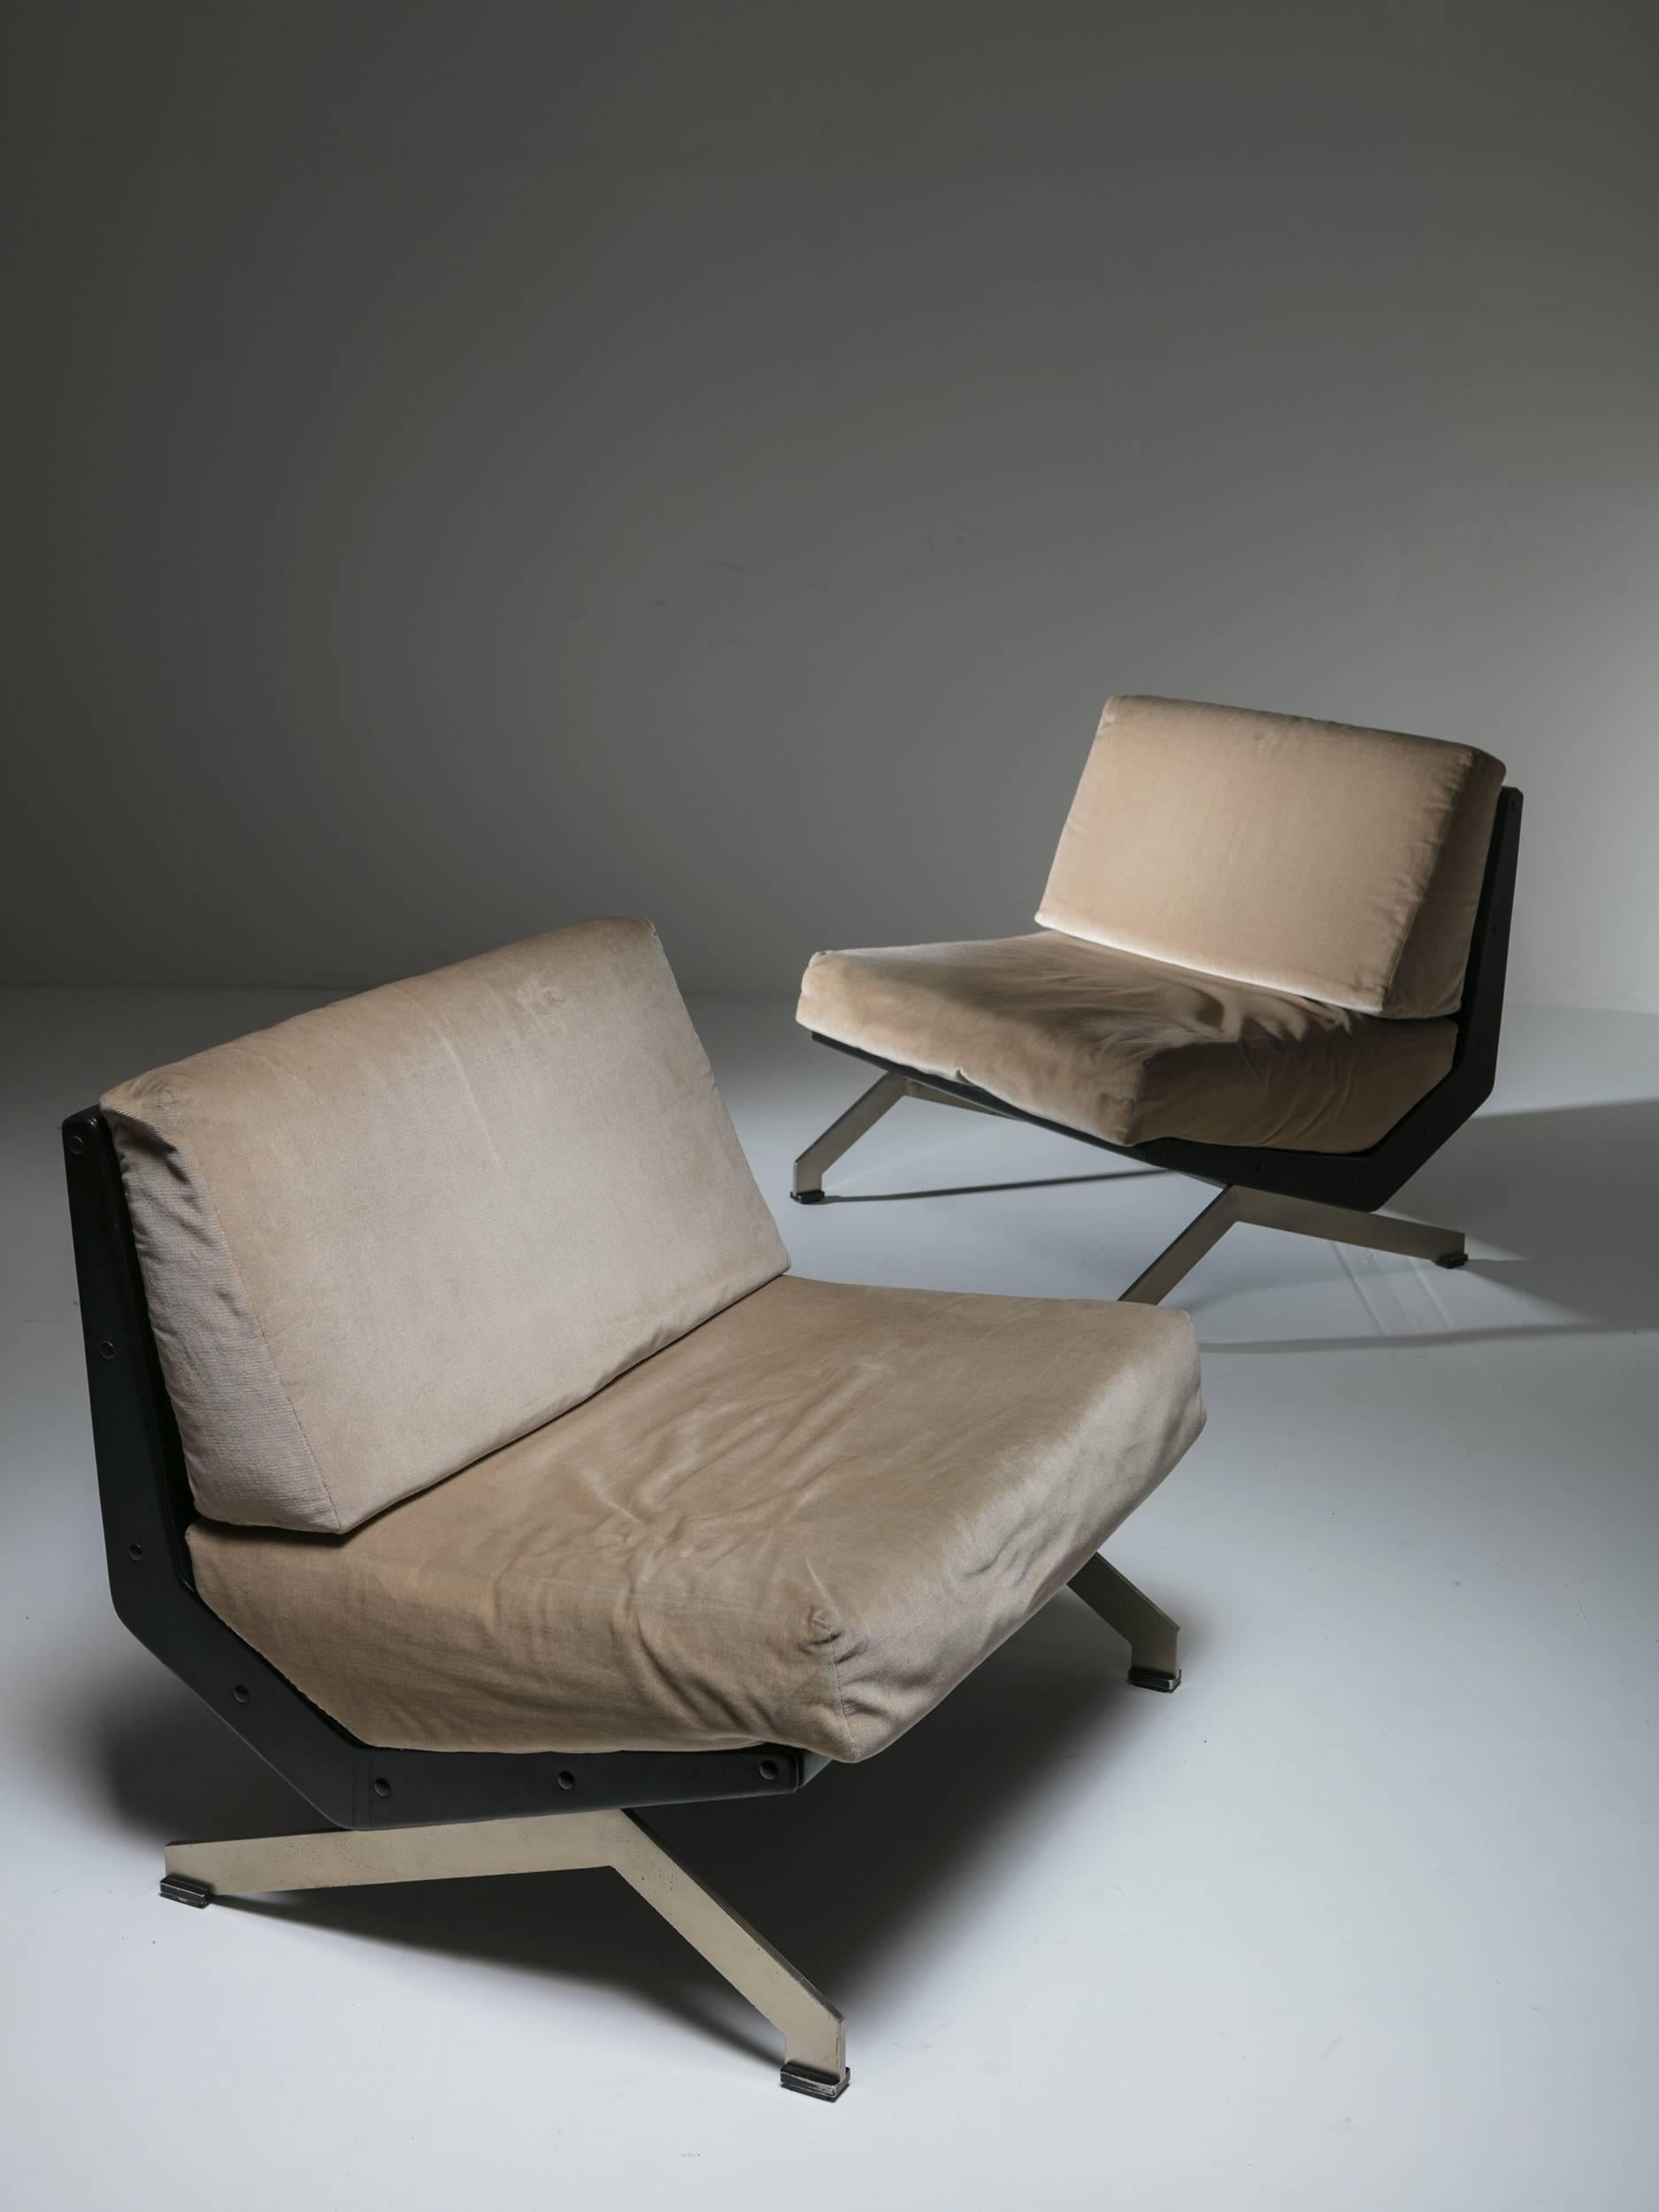 Remarkable pair of lounge chairs by Gianni Moscatelli for Formanova.
Aluminum base, artificial leather and velvet for this really comfortable seat. These pieces can also be used without pillows, showing an extremely up-front design.